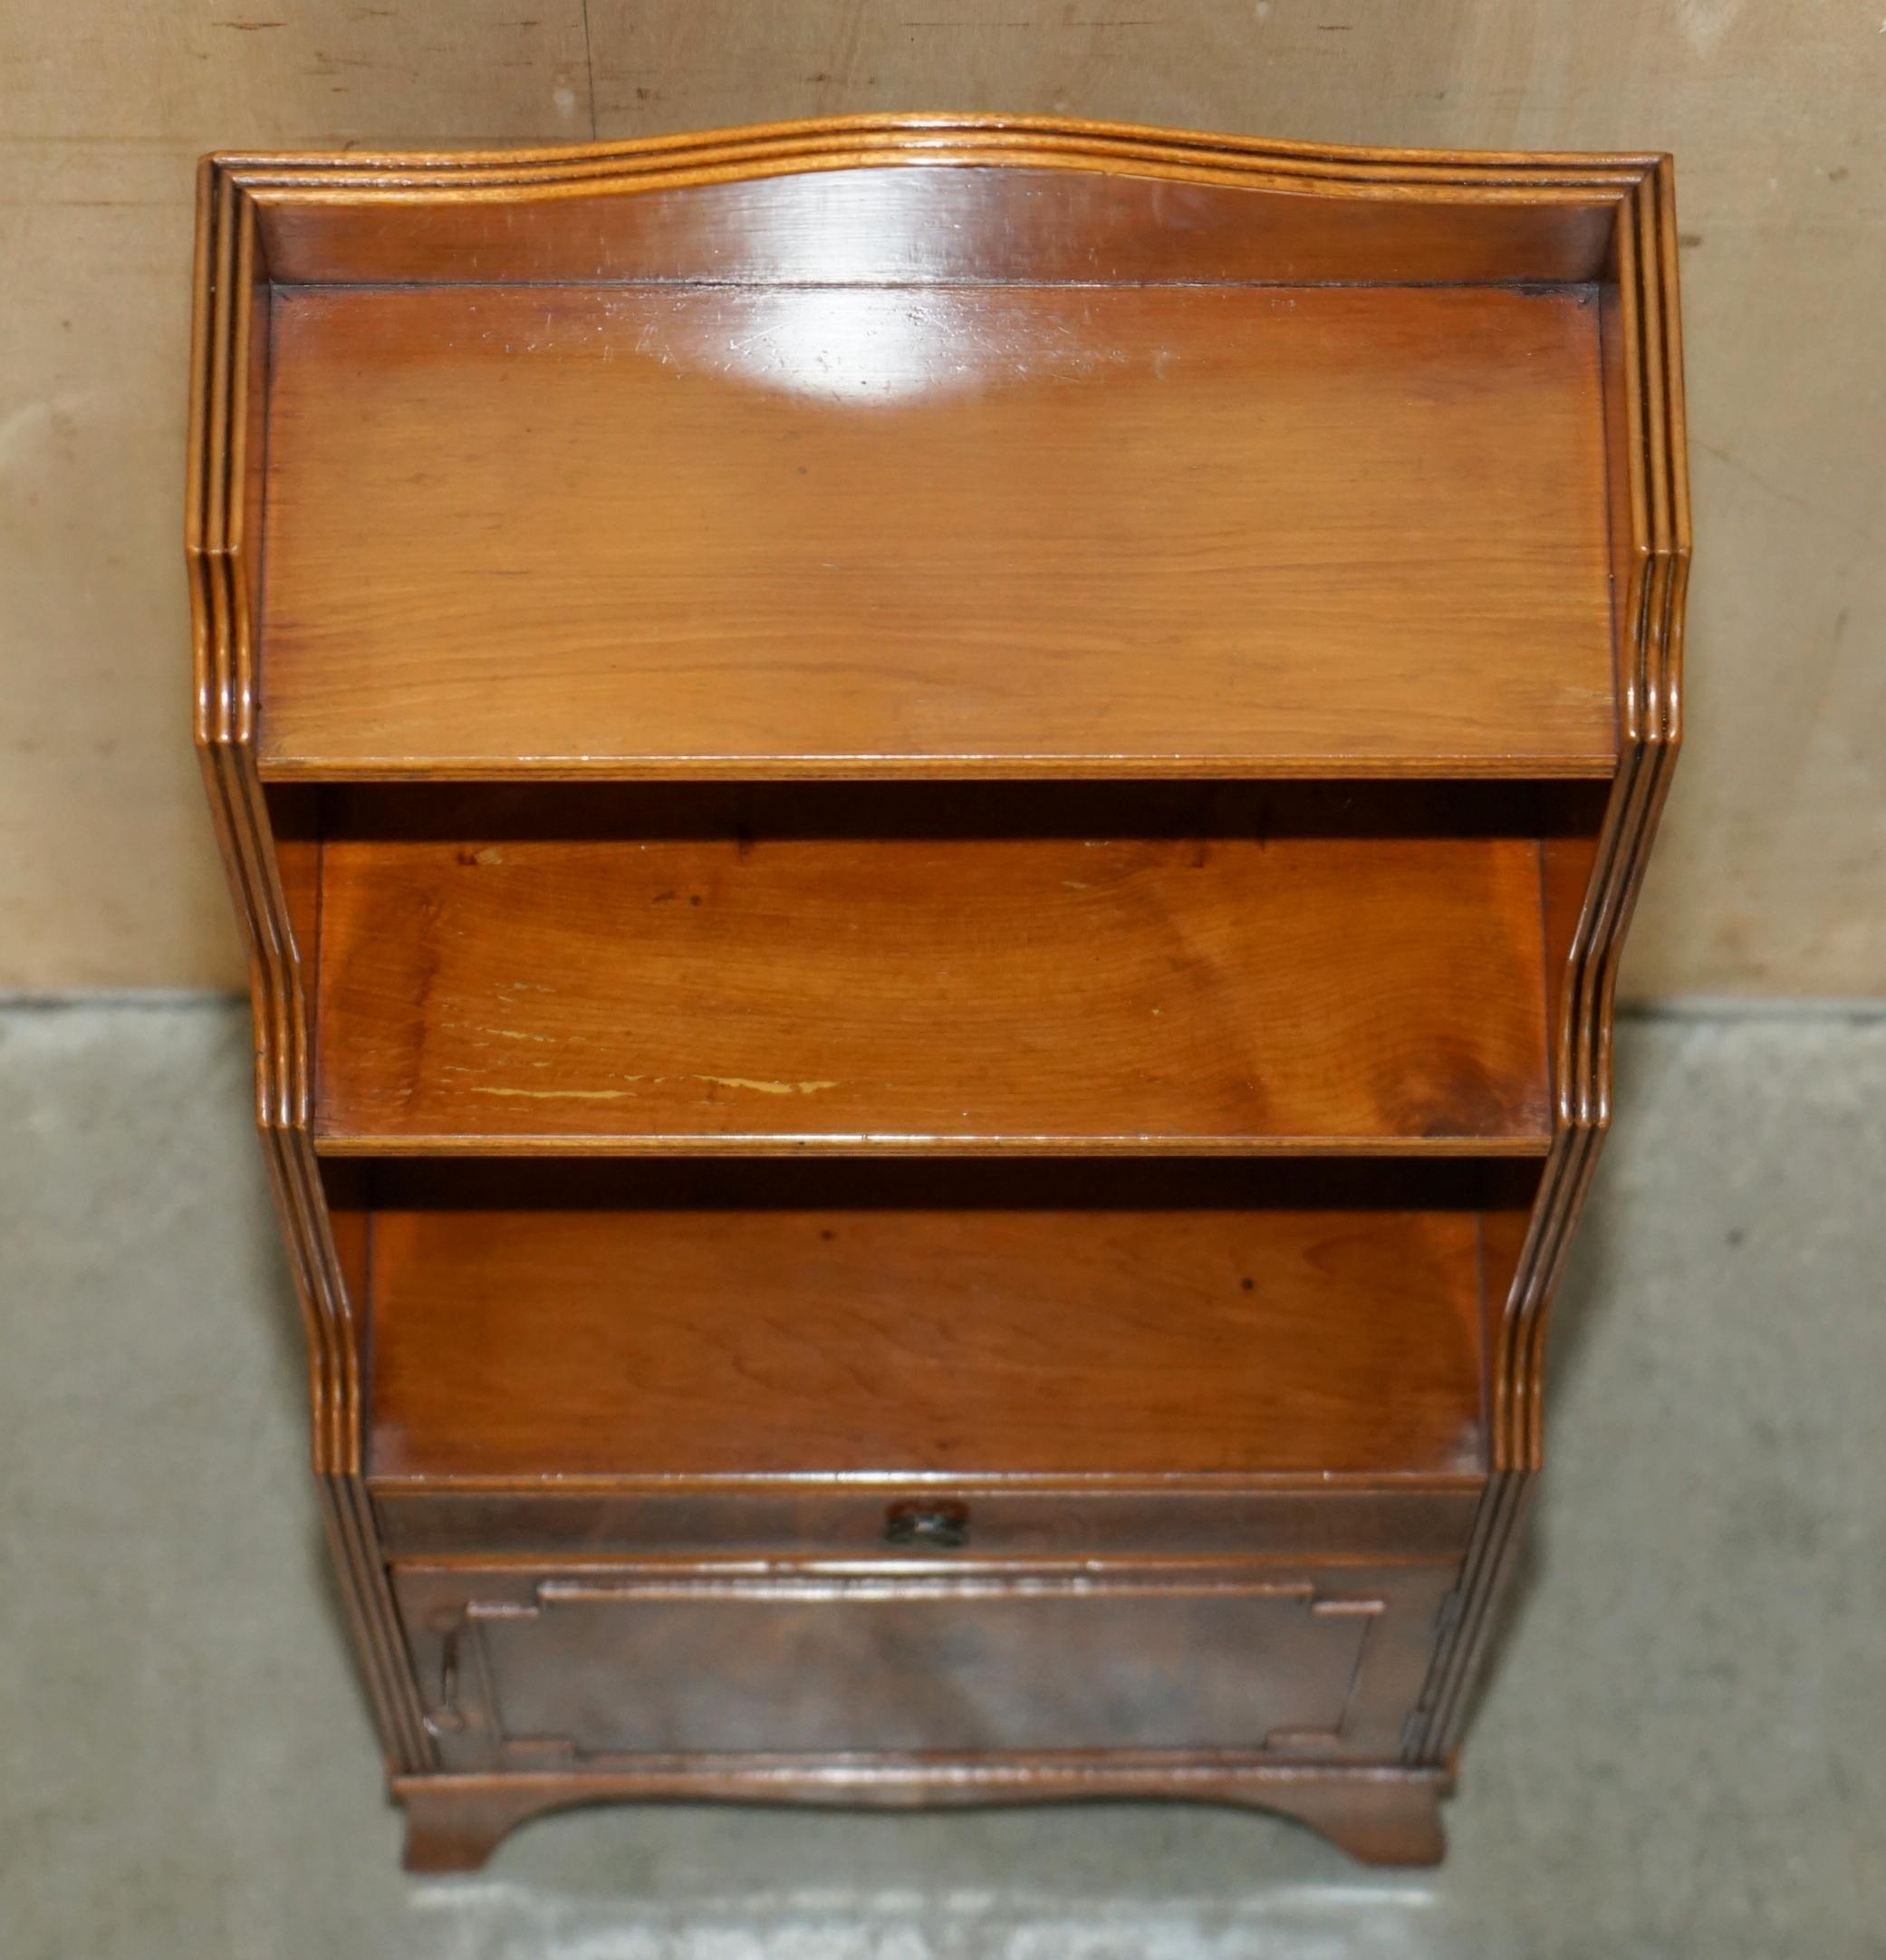 PAIR OF ViNTAGE ENGLISH FLAMED HARDWOOD WATERFALL BOOKCASES WITH CUPBOARD BASES For Sale 3